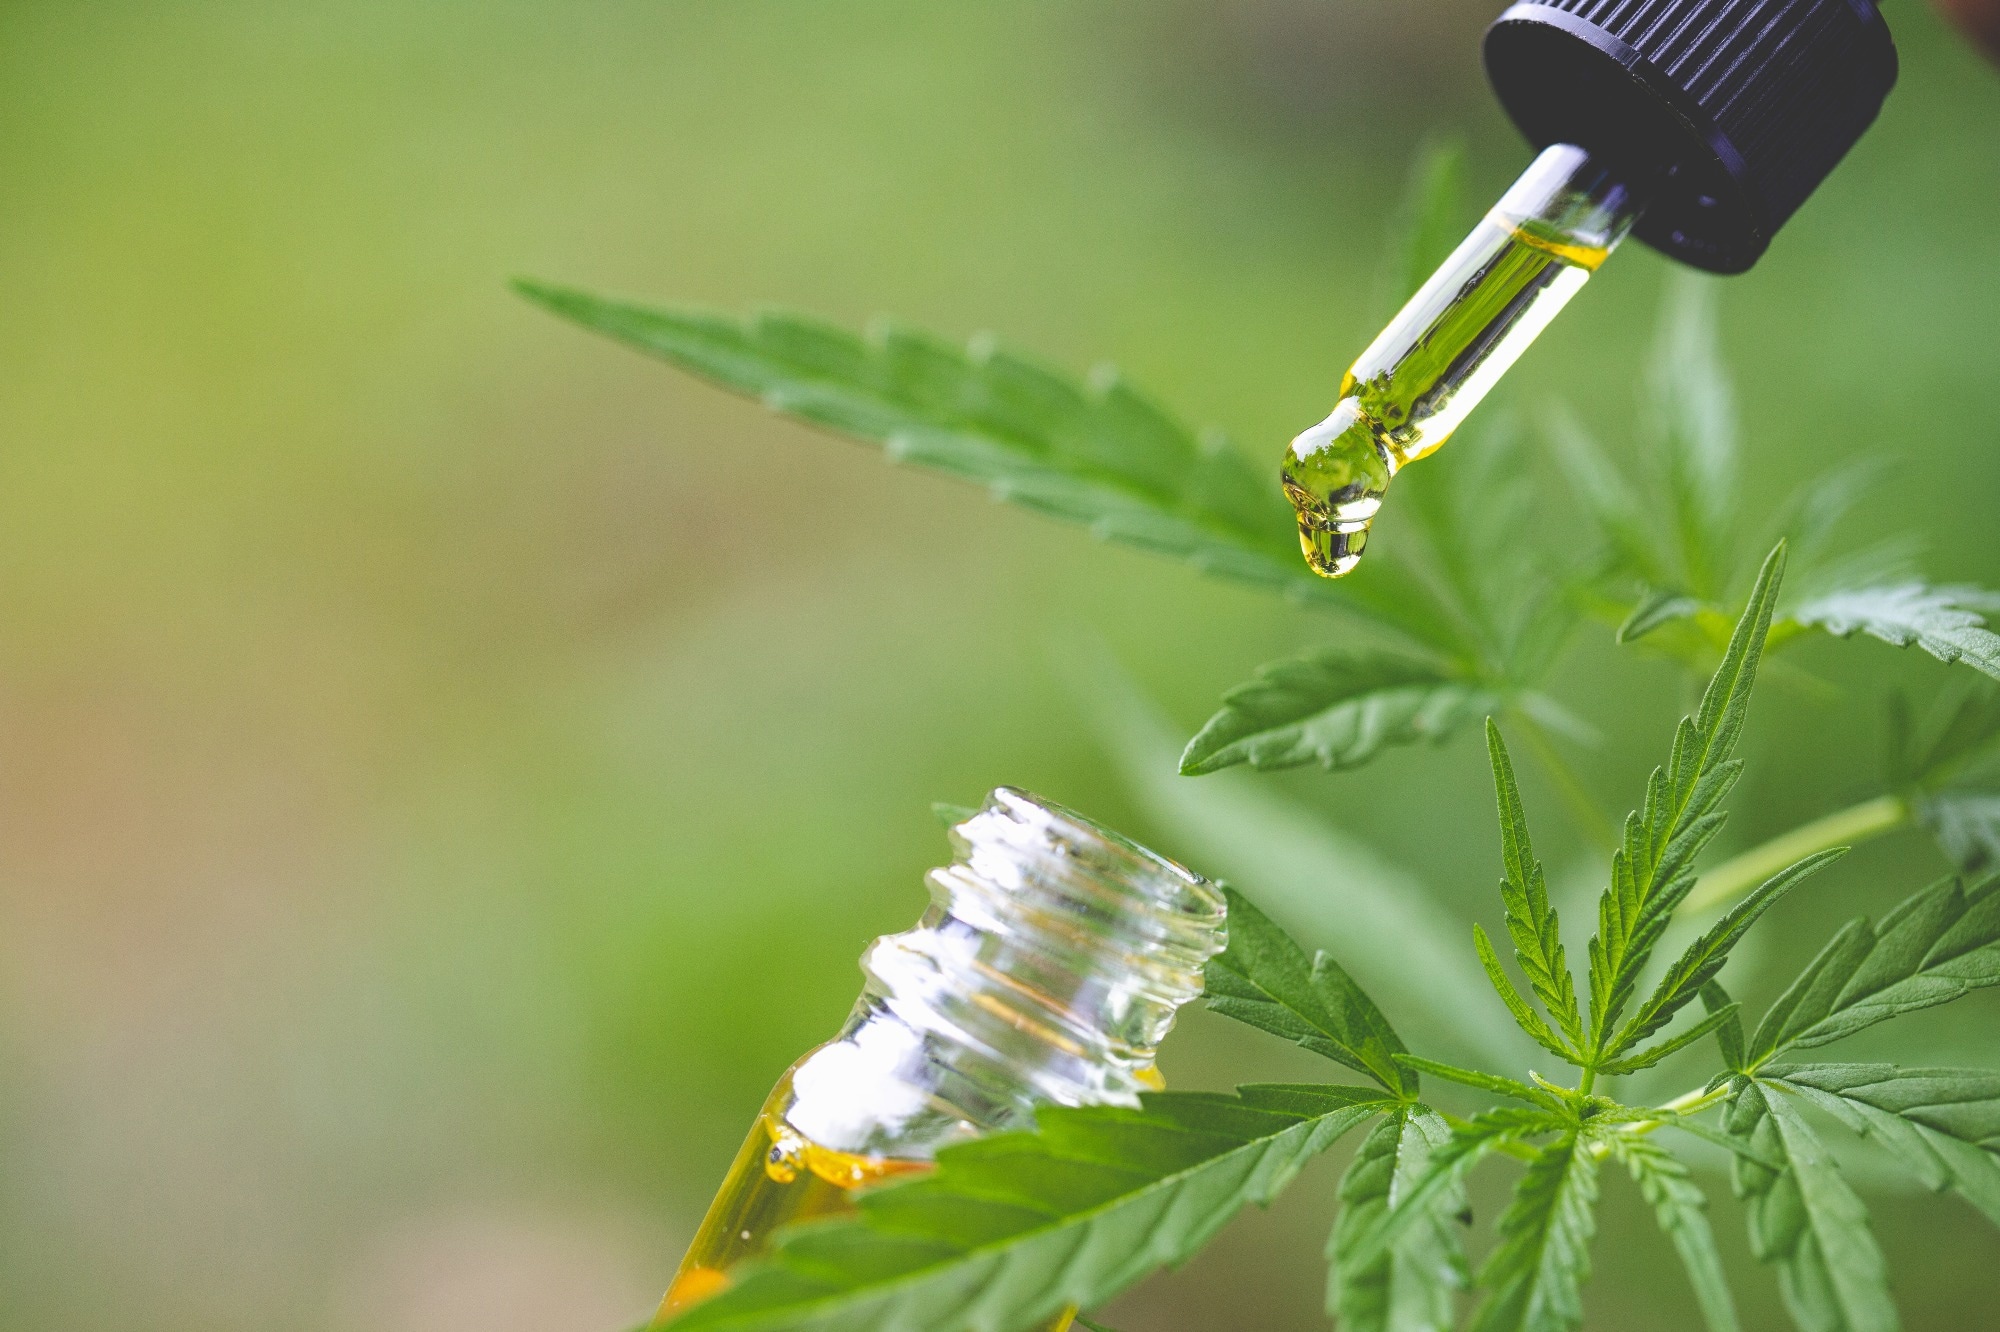 Study: Evaluation of cannabidiol nanoparticles and nanoemulsion biodistribution in the central nervous system after intrathecal administration for the treatment of pain. Image Credit: Tinnakorn jorruang/Shutterstock